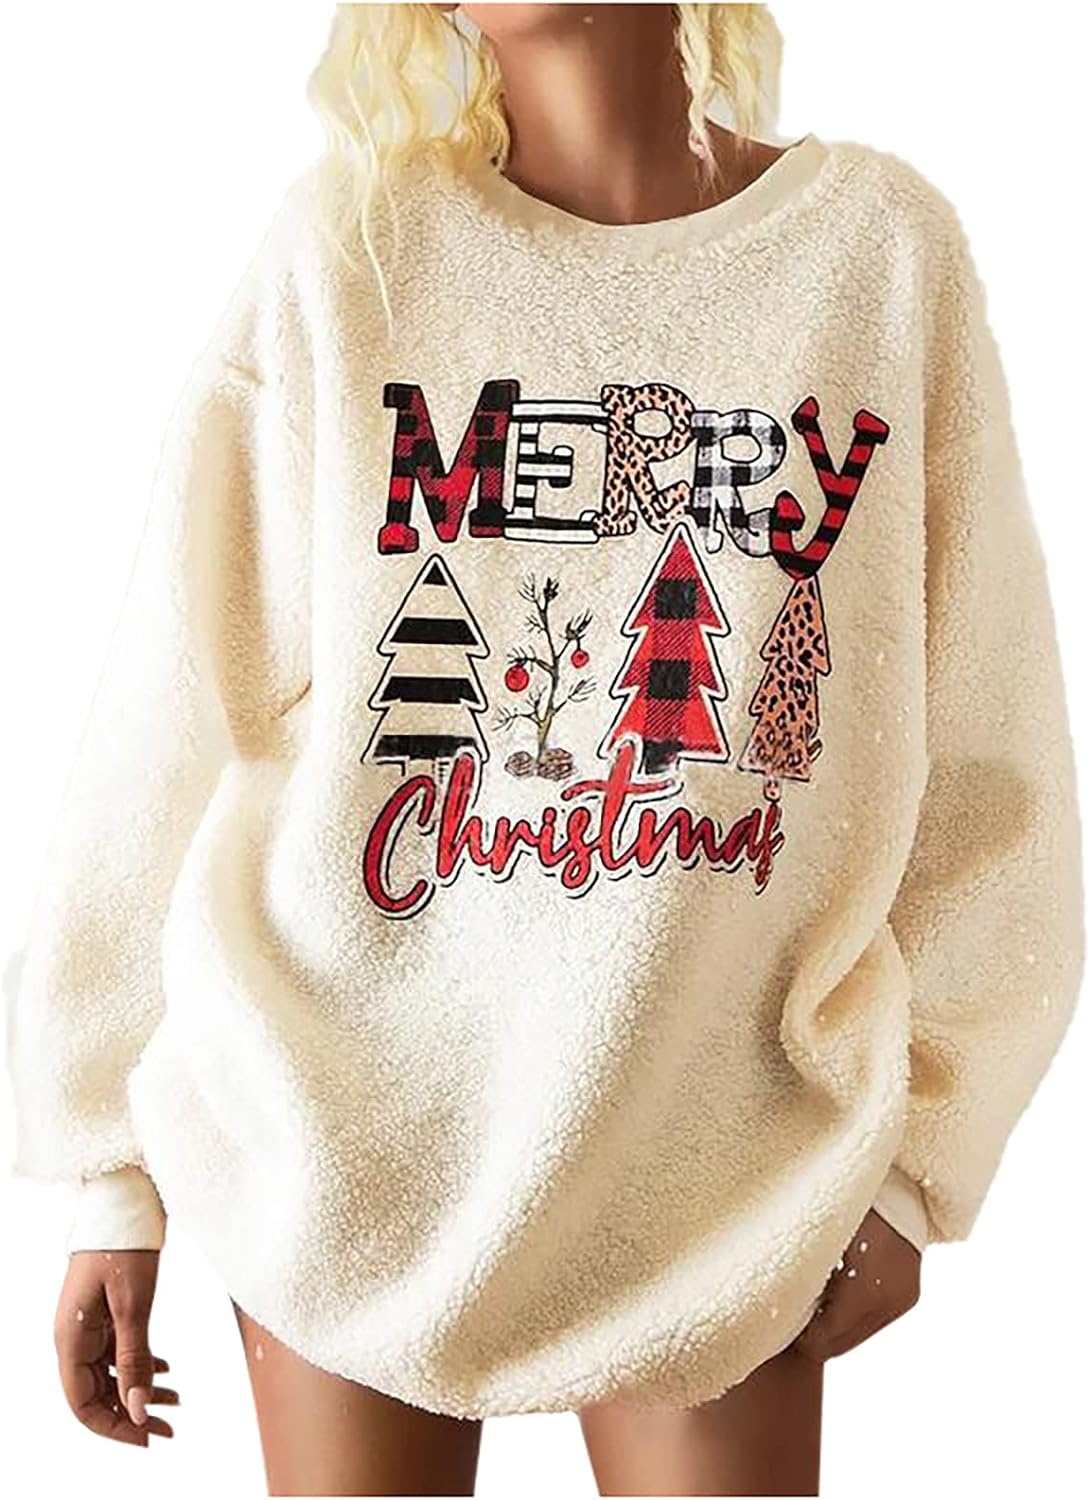 Wirziis Merry Christmas Graphic Sweatshirts for Women Fashion Crewneck Pullover Blouses Long Sleeve Blouses Tunic Tops